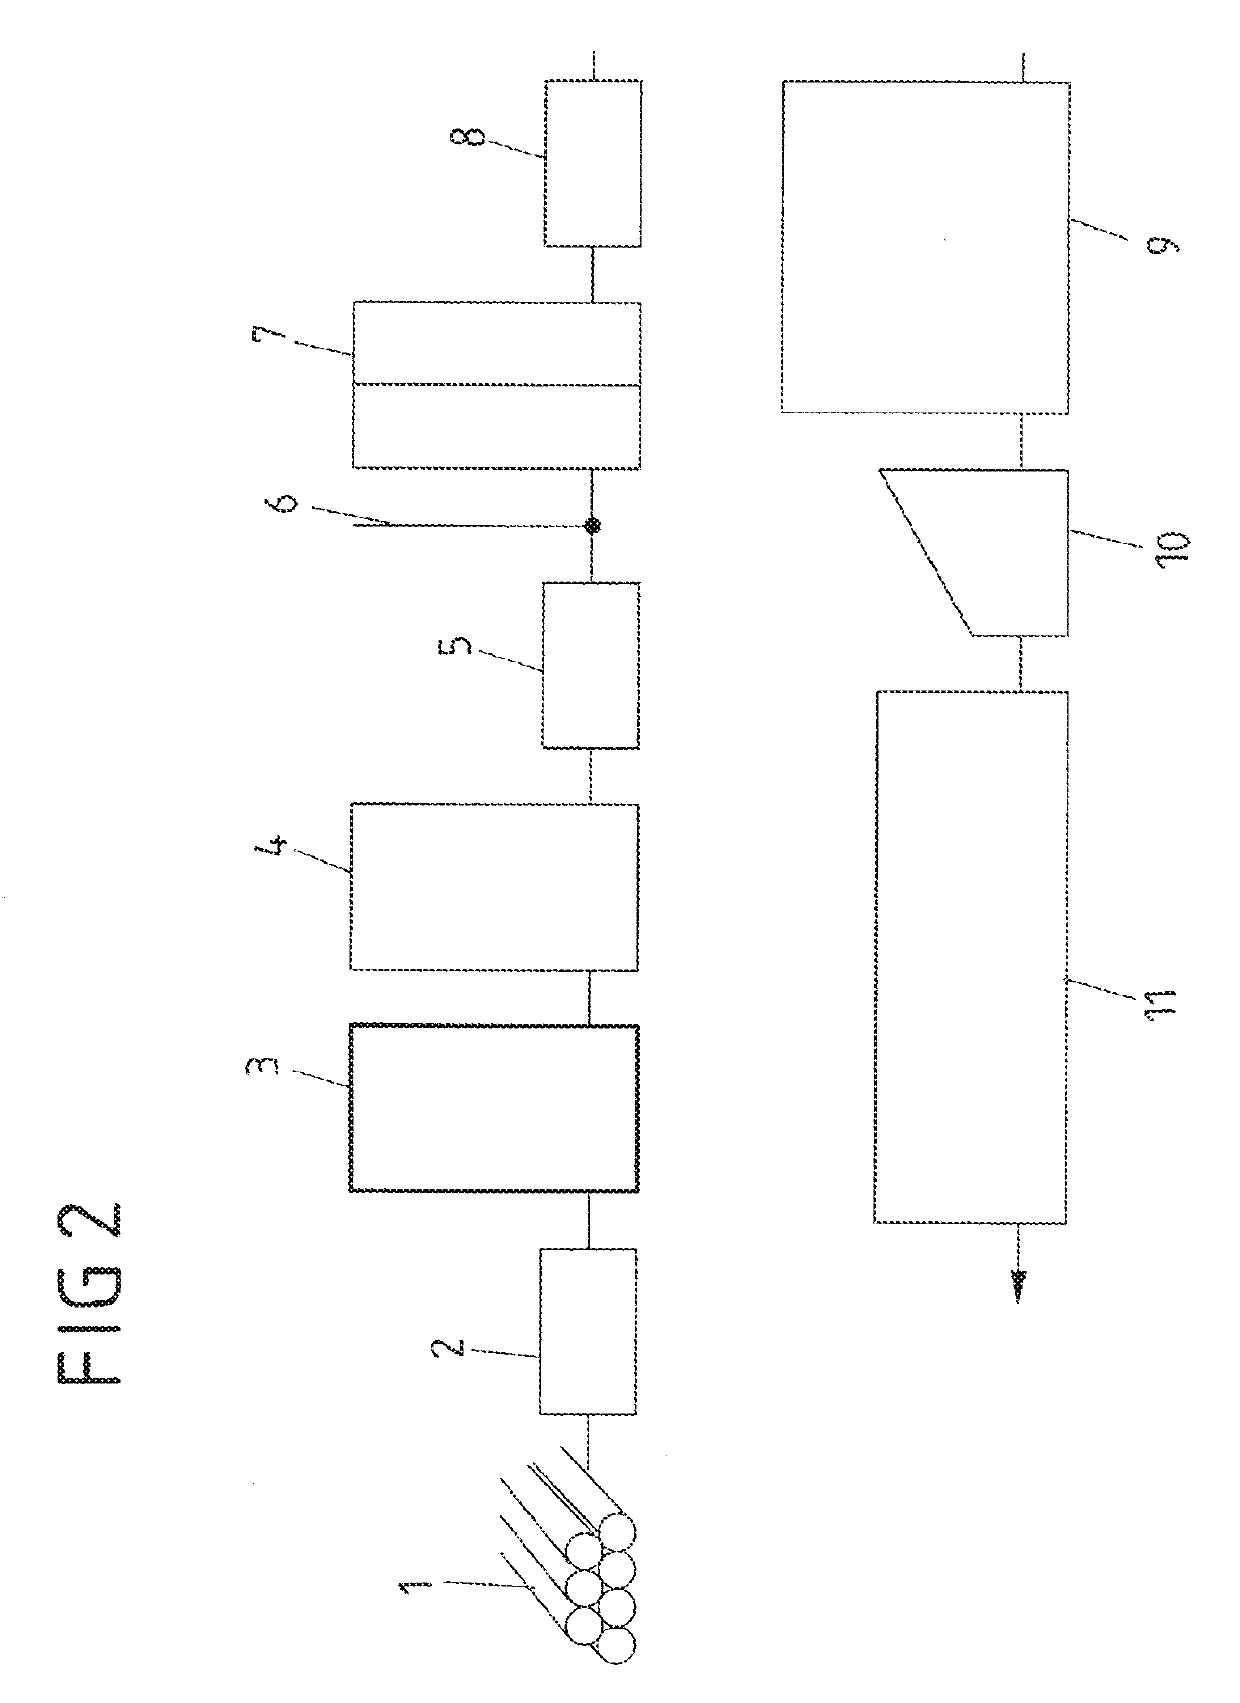 Wood material board with reduced emission of volatile organic compounds (VOCs) and method for the production thereof